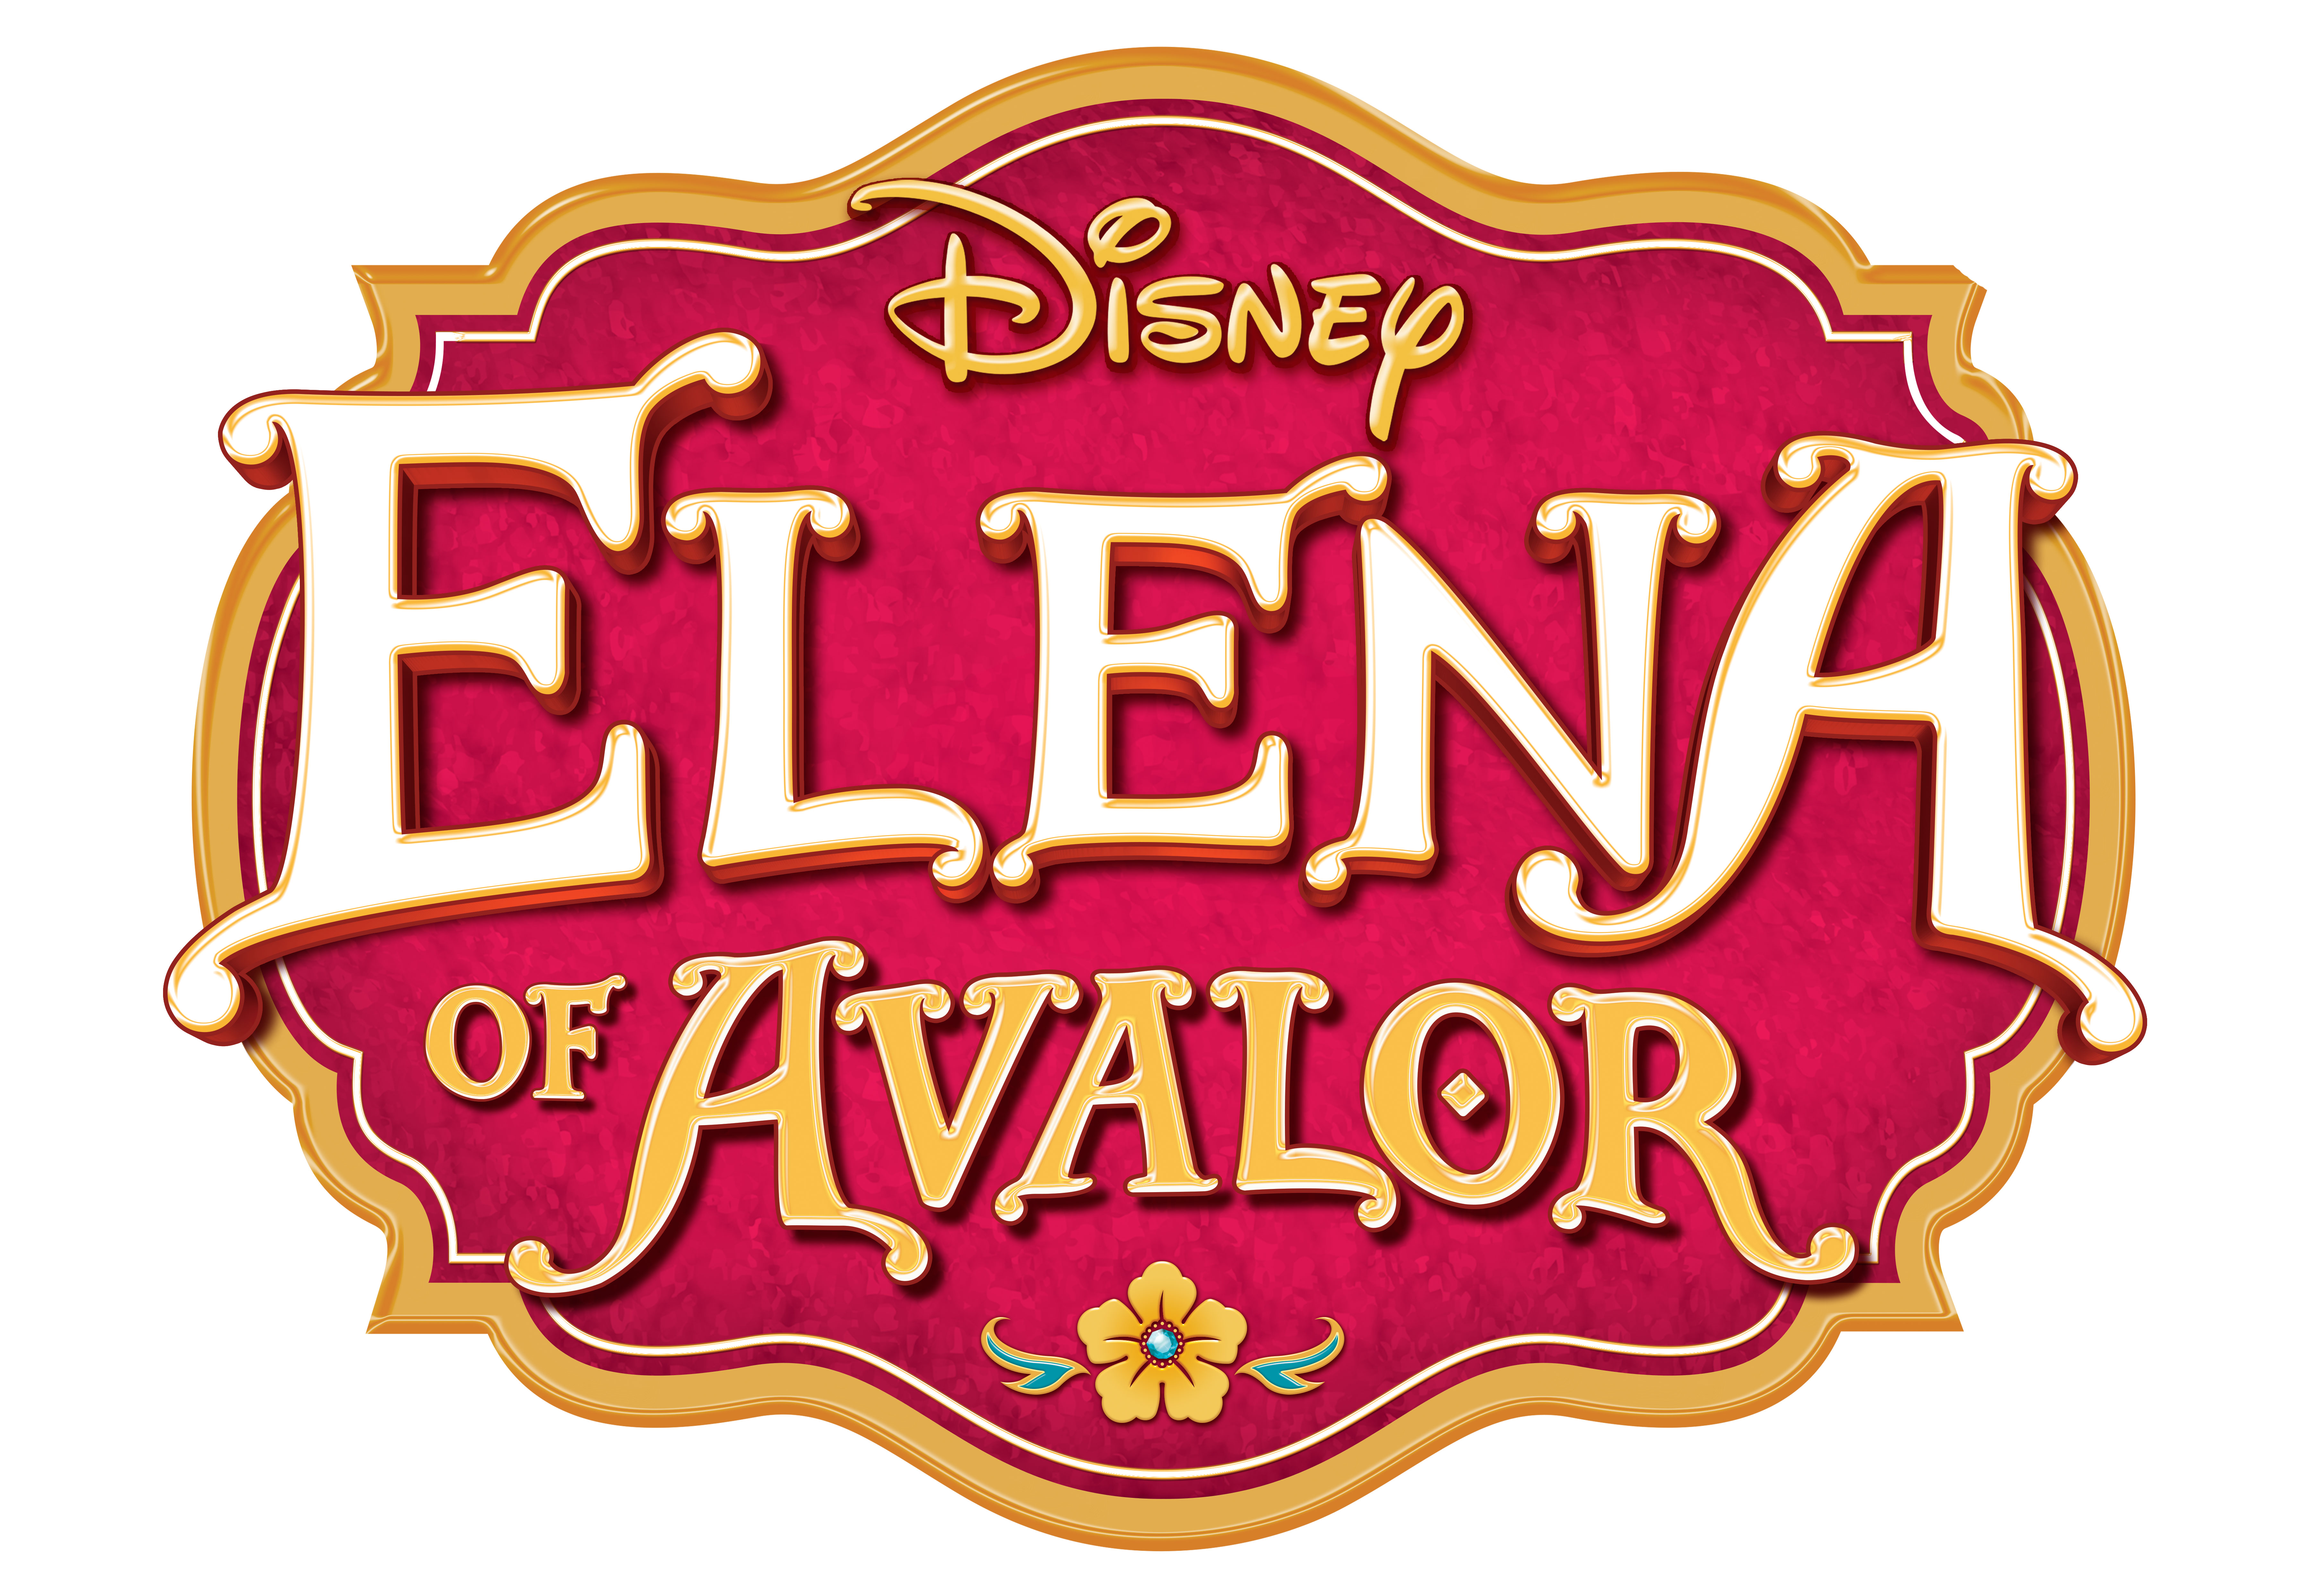 Be holiday ready with Elena: Gift ideas fit for a princess - Prize Pack Giveaway!